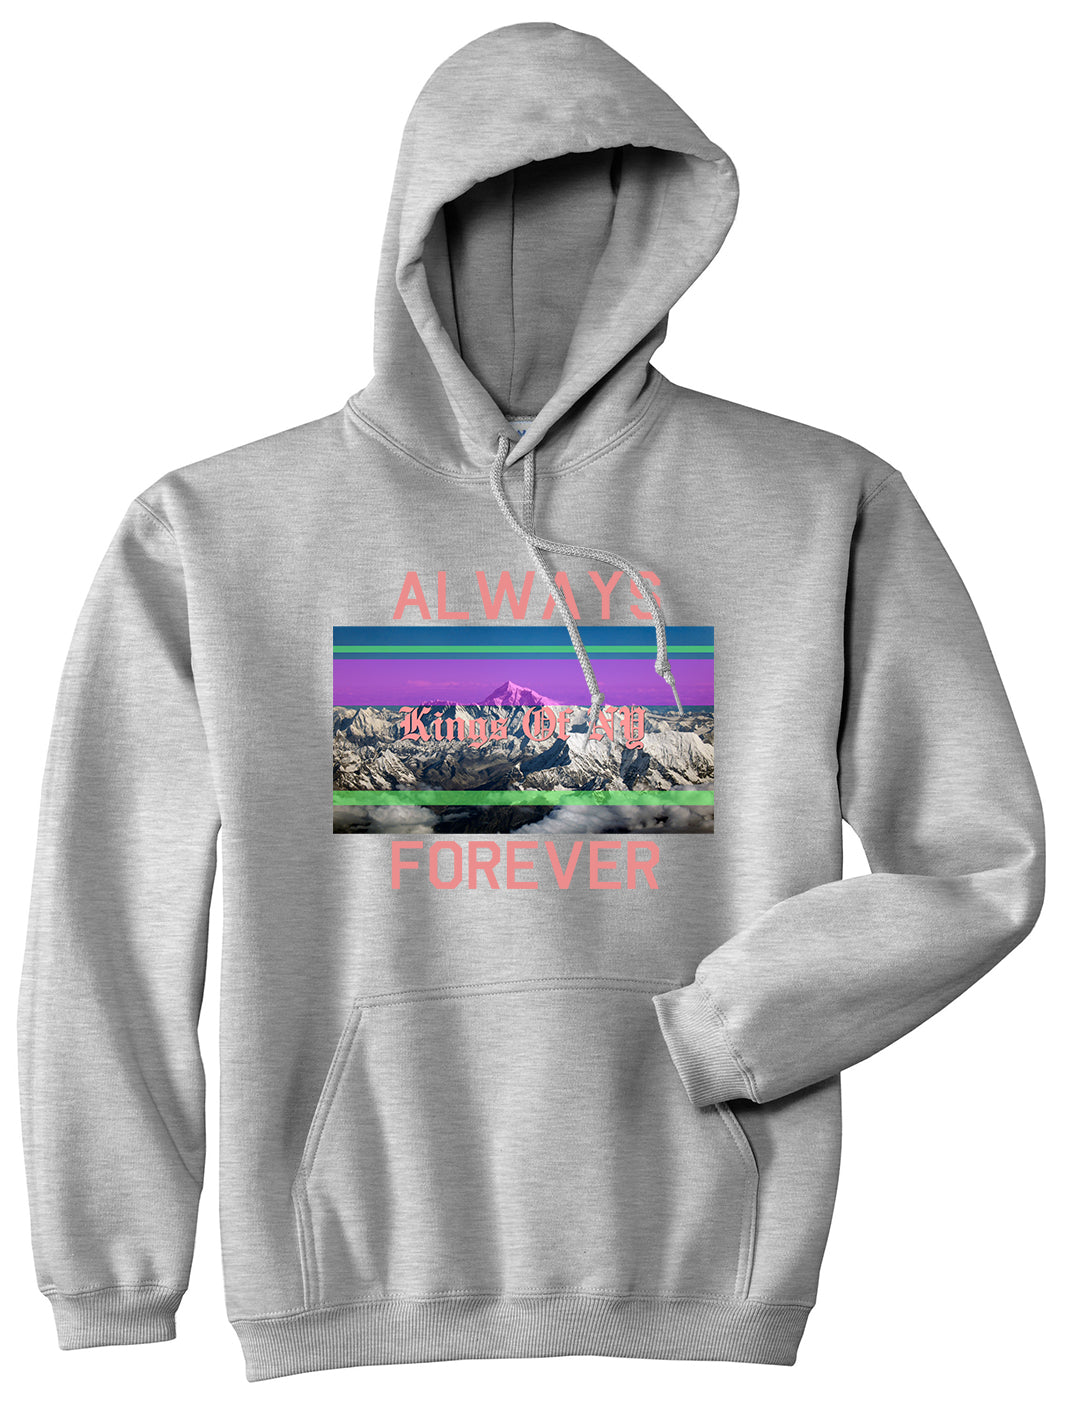 Mountains Always And Forever Mens Pullover Hoodie Grey by Kings Of NY